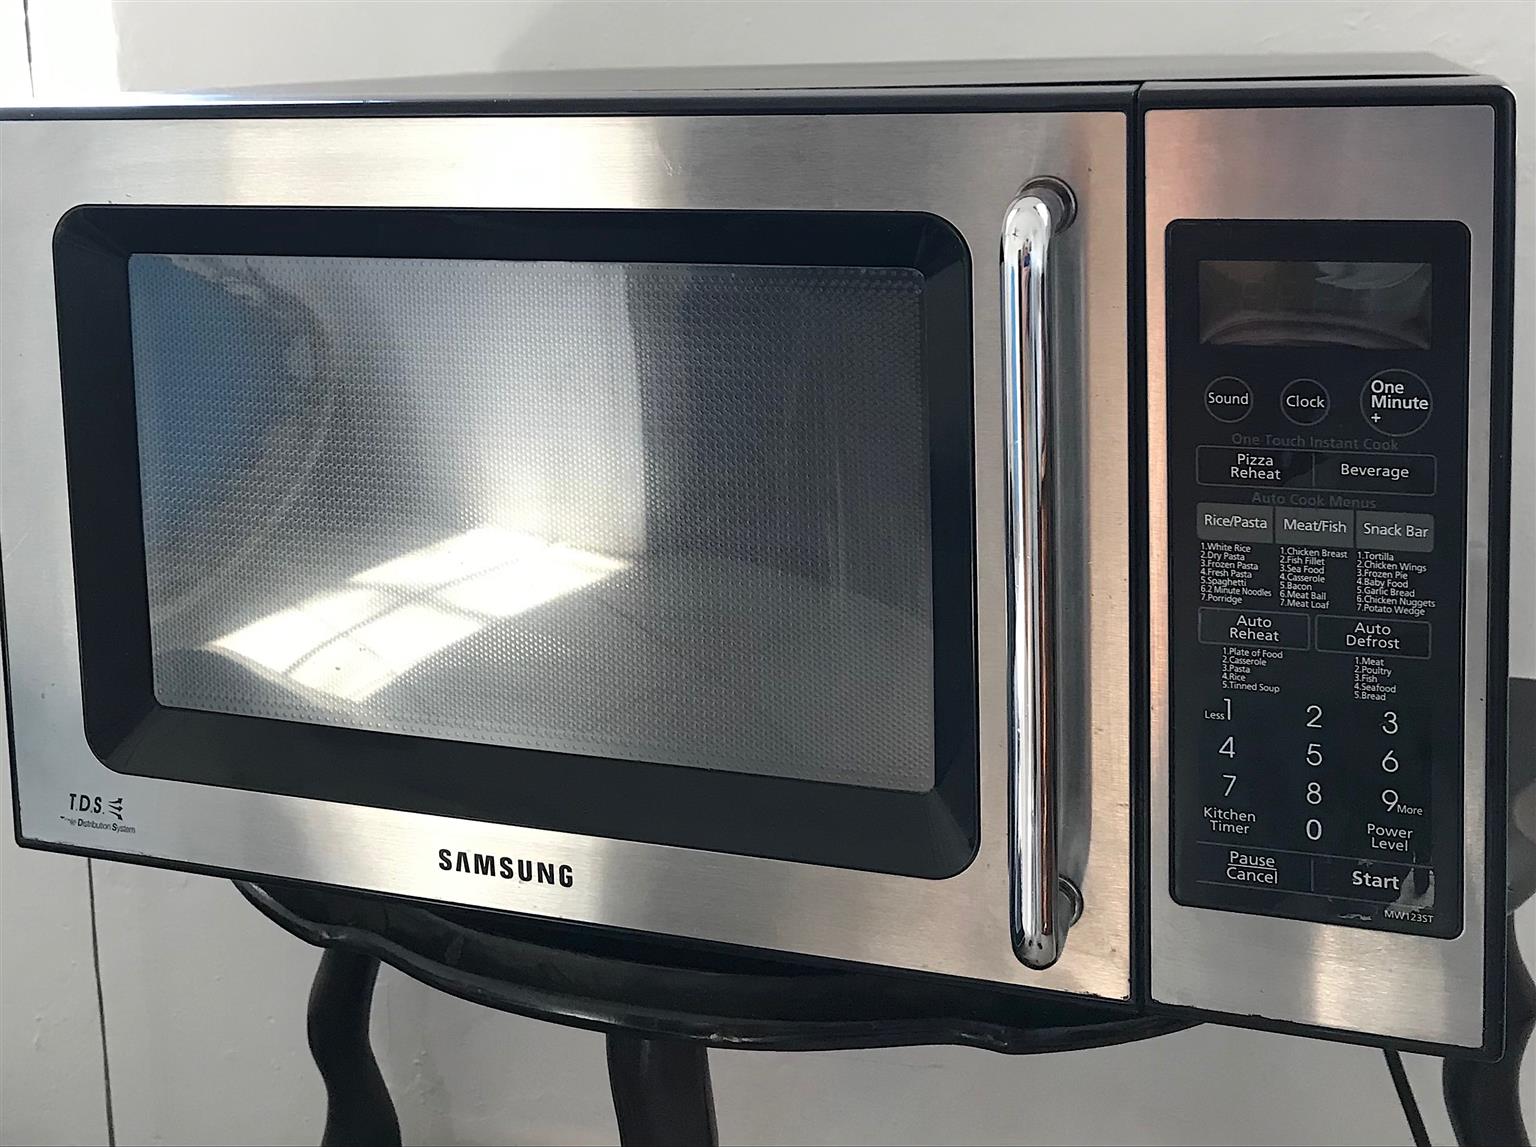 Samsung Microwave Oven: Bread Defrost 